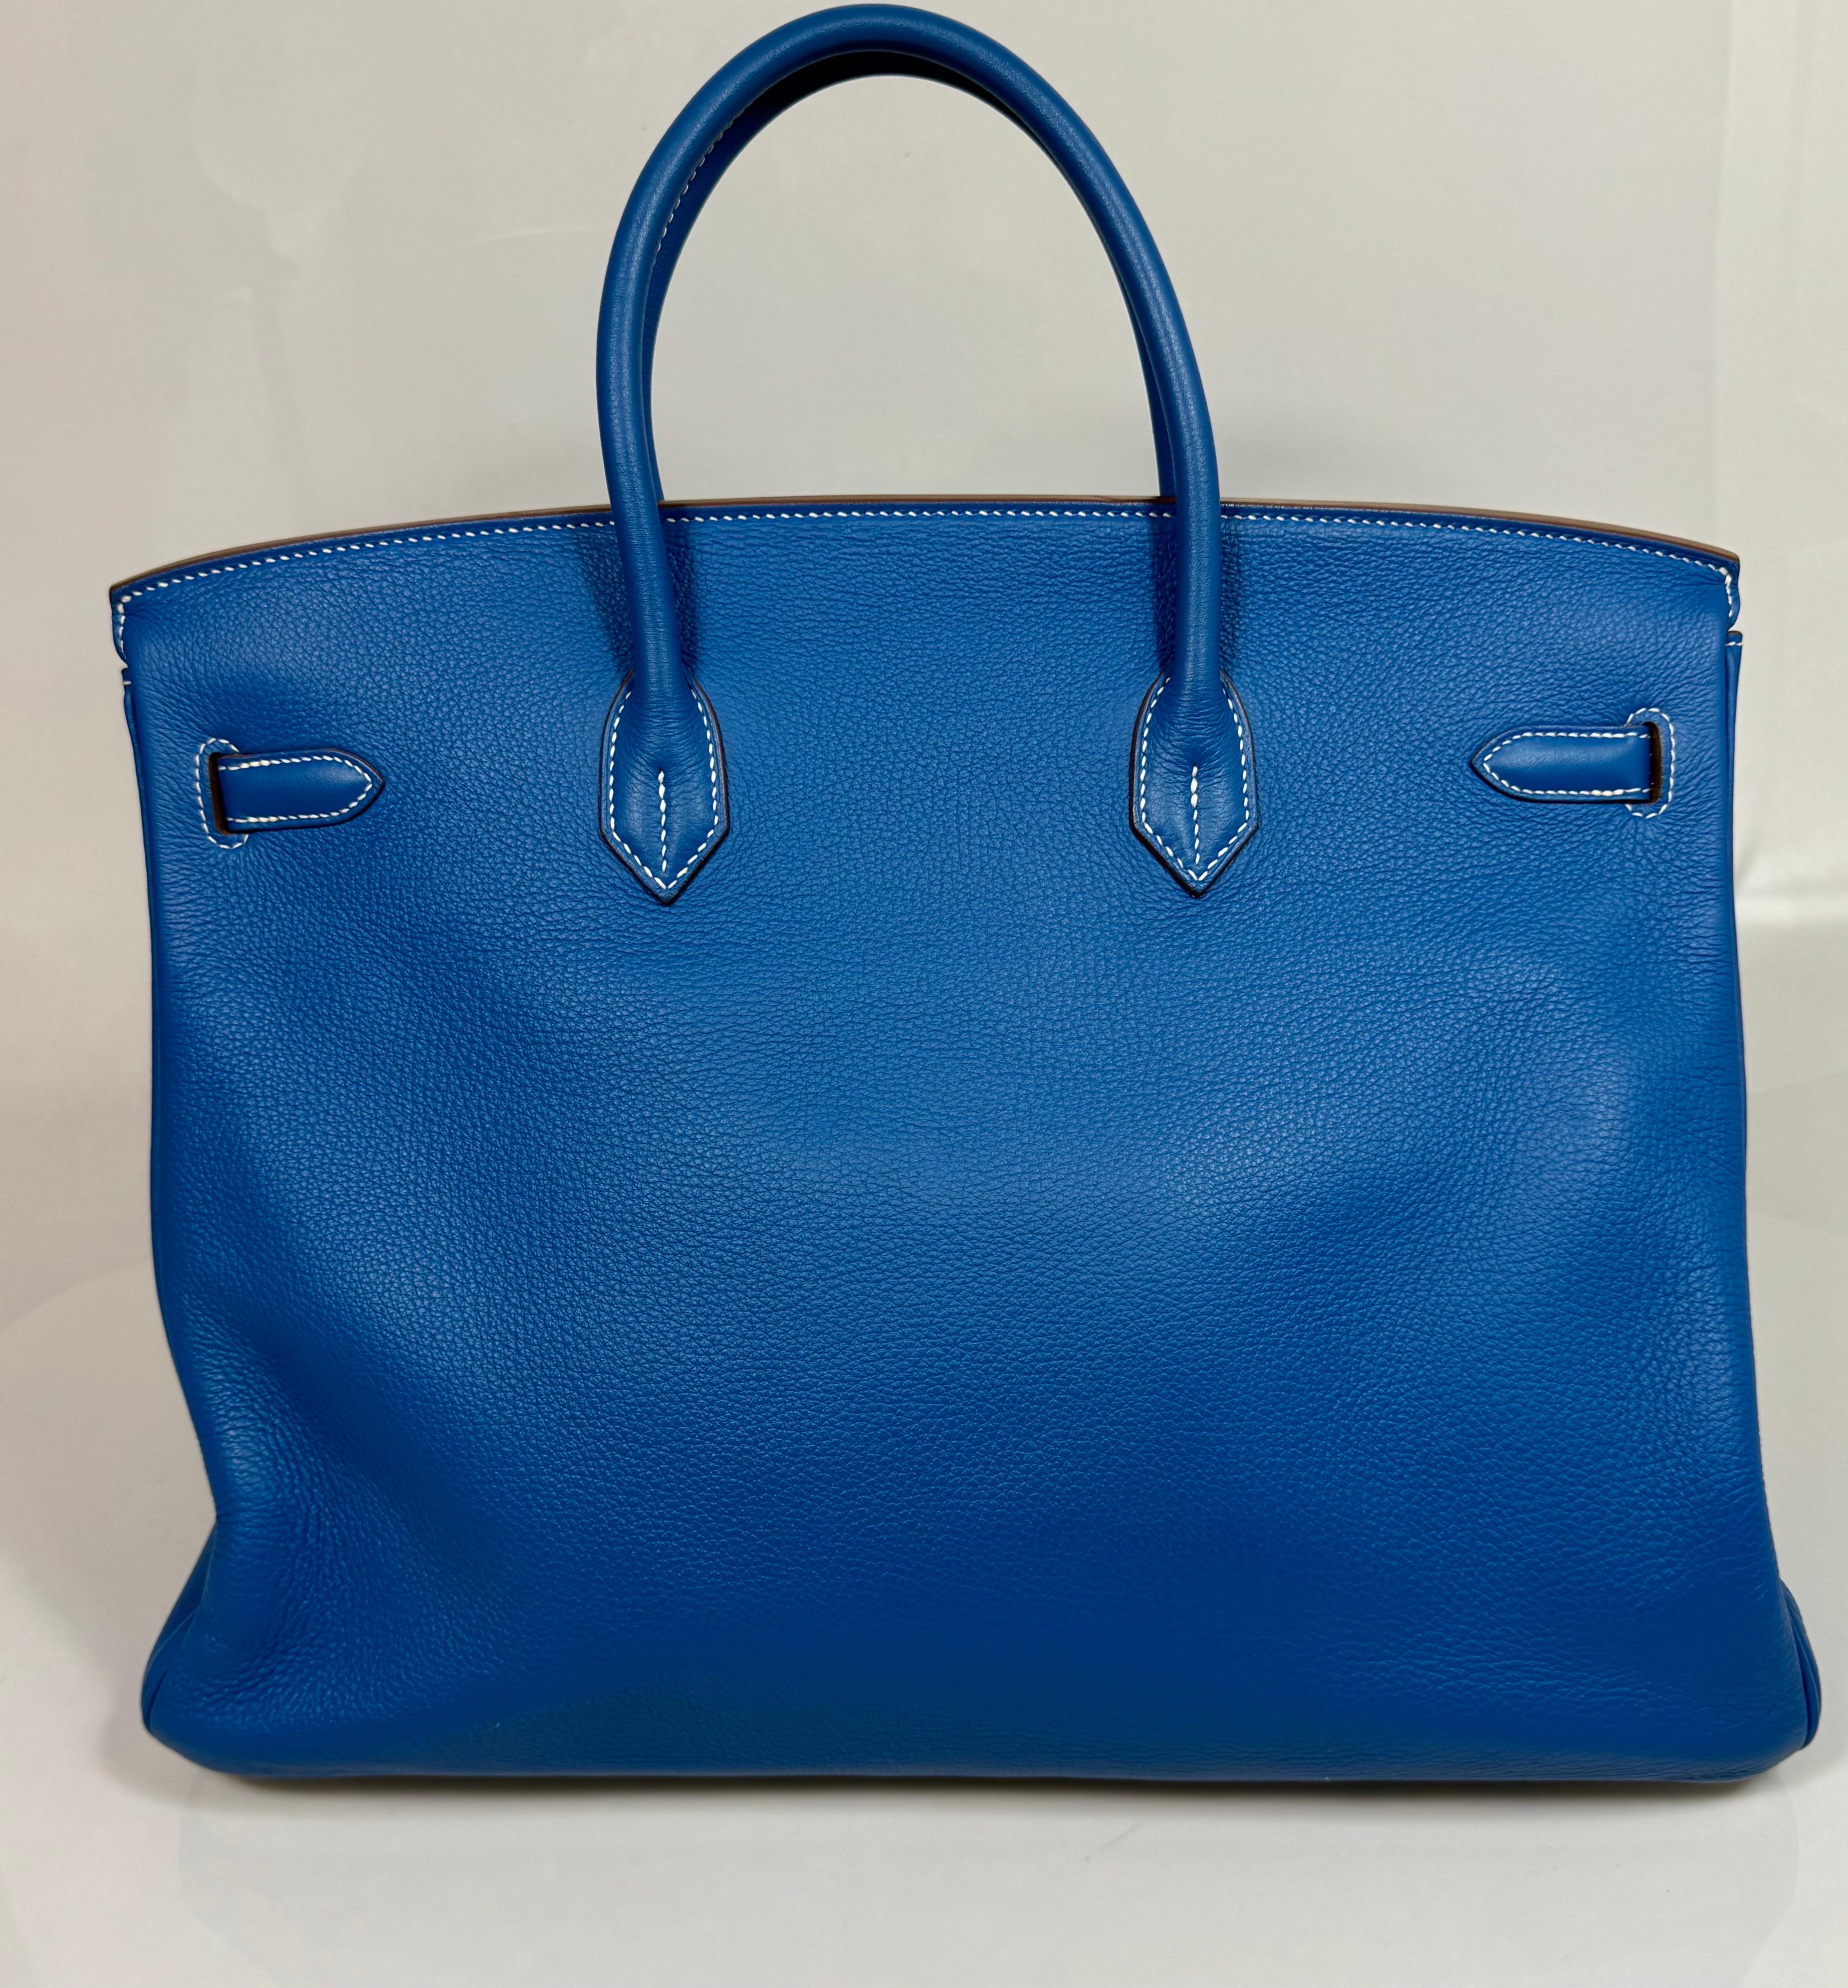 Hermes 40cm  Mykonos Blue and White Clemence Limited edition Birkin-SHW -2011 In Good Condition For Sale In West Palm Beach, FL